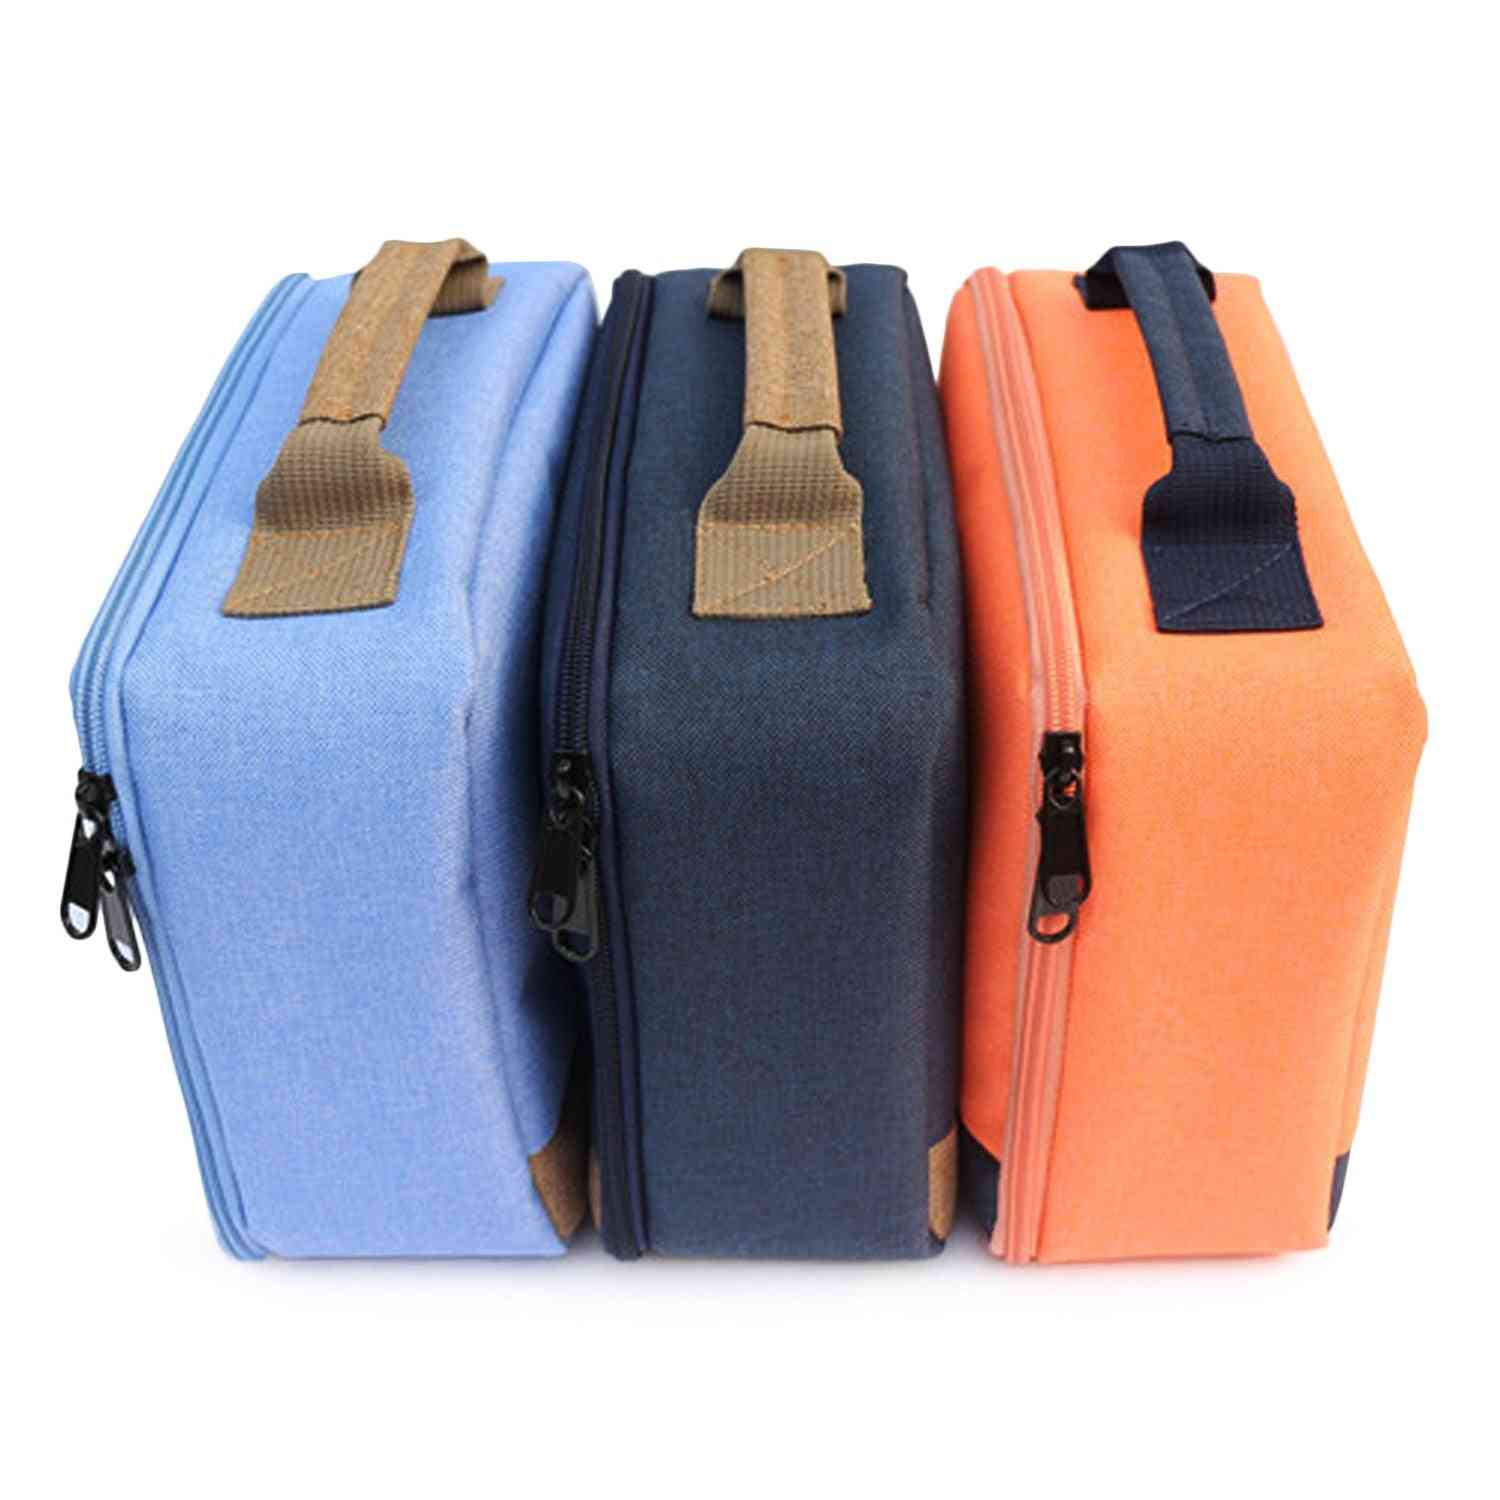 Portable Scratchproof, Shockproof Canvas Storage, Carry Bag, Handbag Case For Selphy Cp910 1200 Mini Printer Projectors